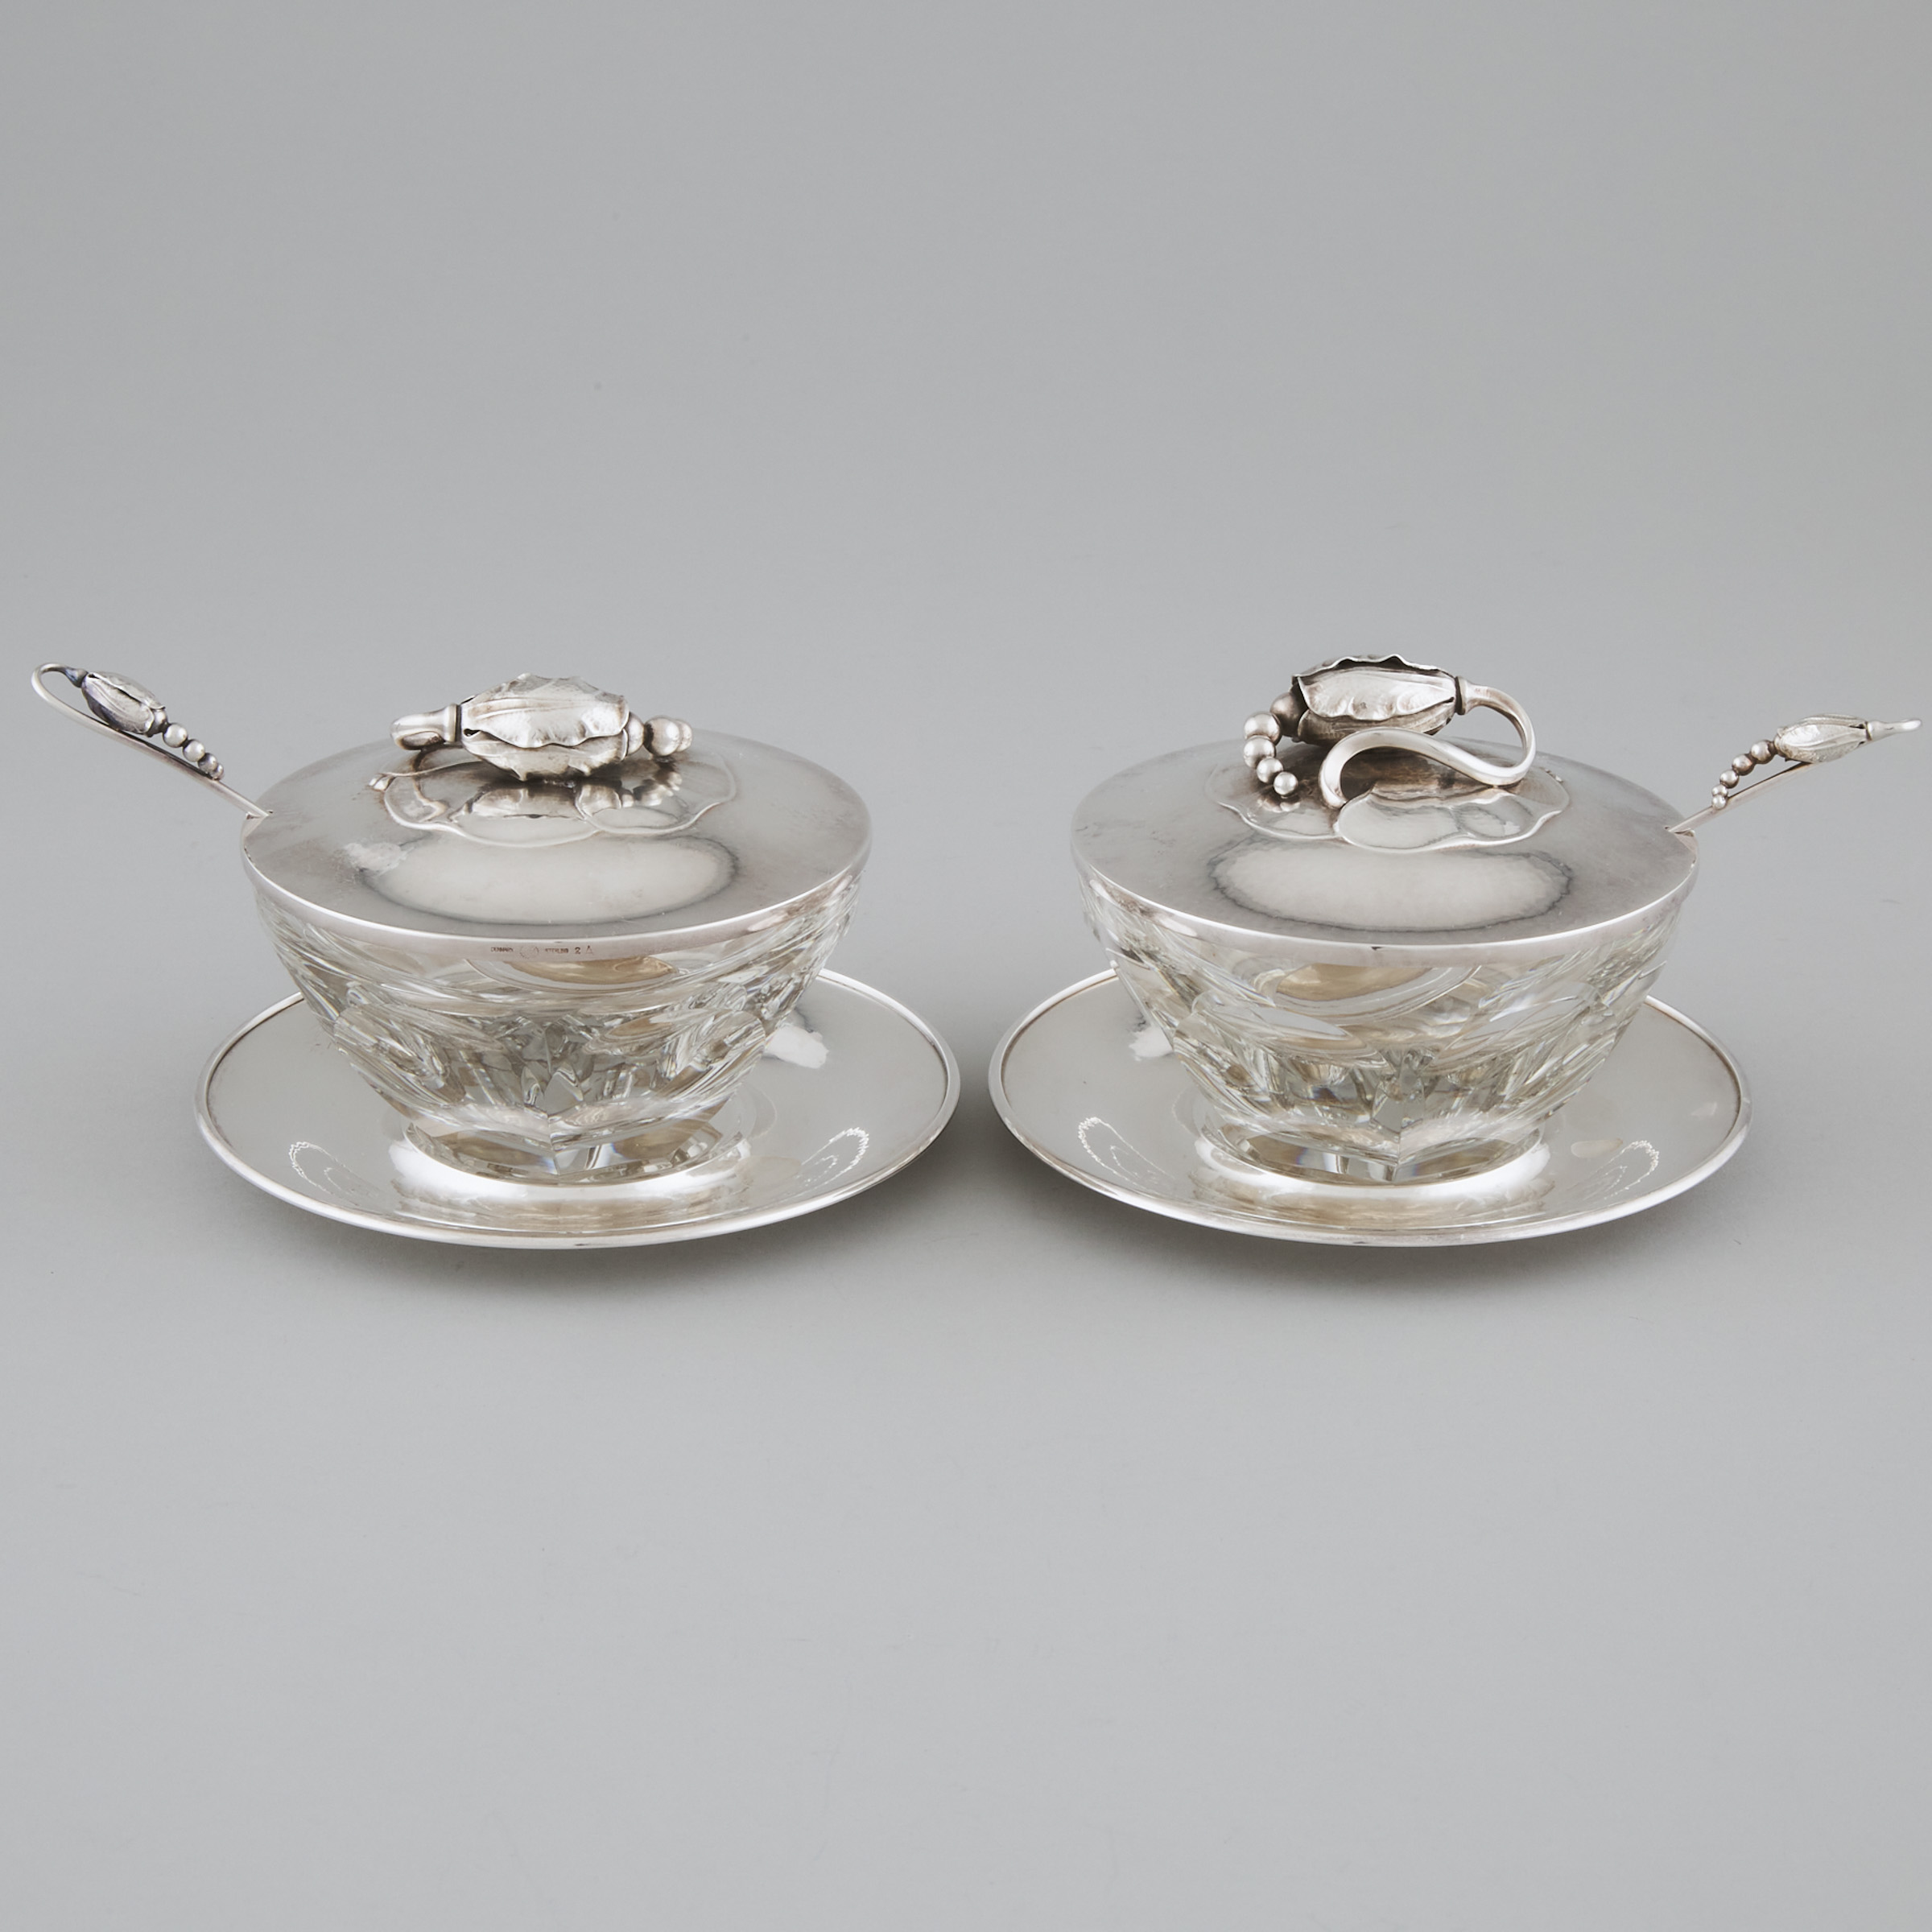 Pair of Danish Silver and Baccarat Cut Glass 'Blossom' Pattern Covered Preserve Jars with Stands and Spoons, #2A and #84, Georg Jensen, Copenhagen, post-1945